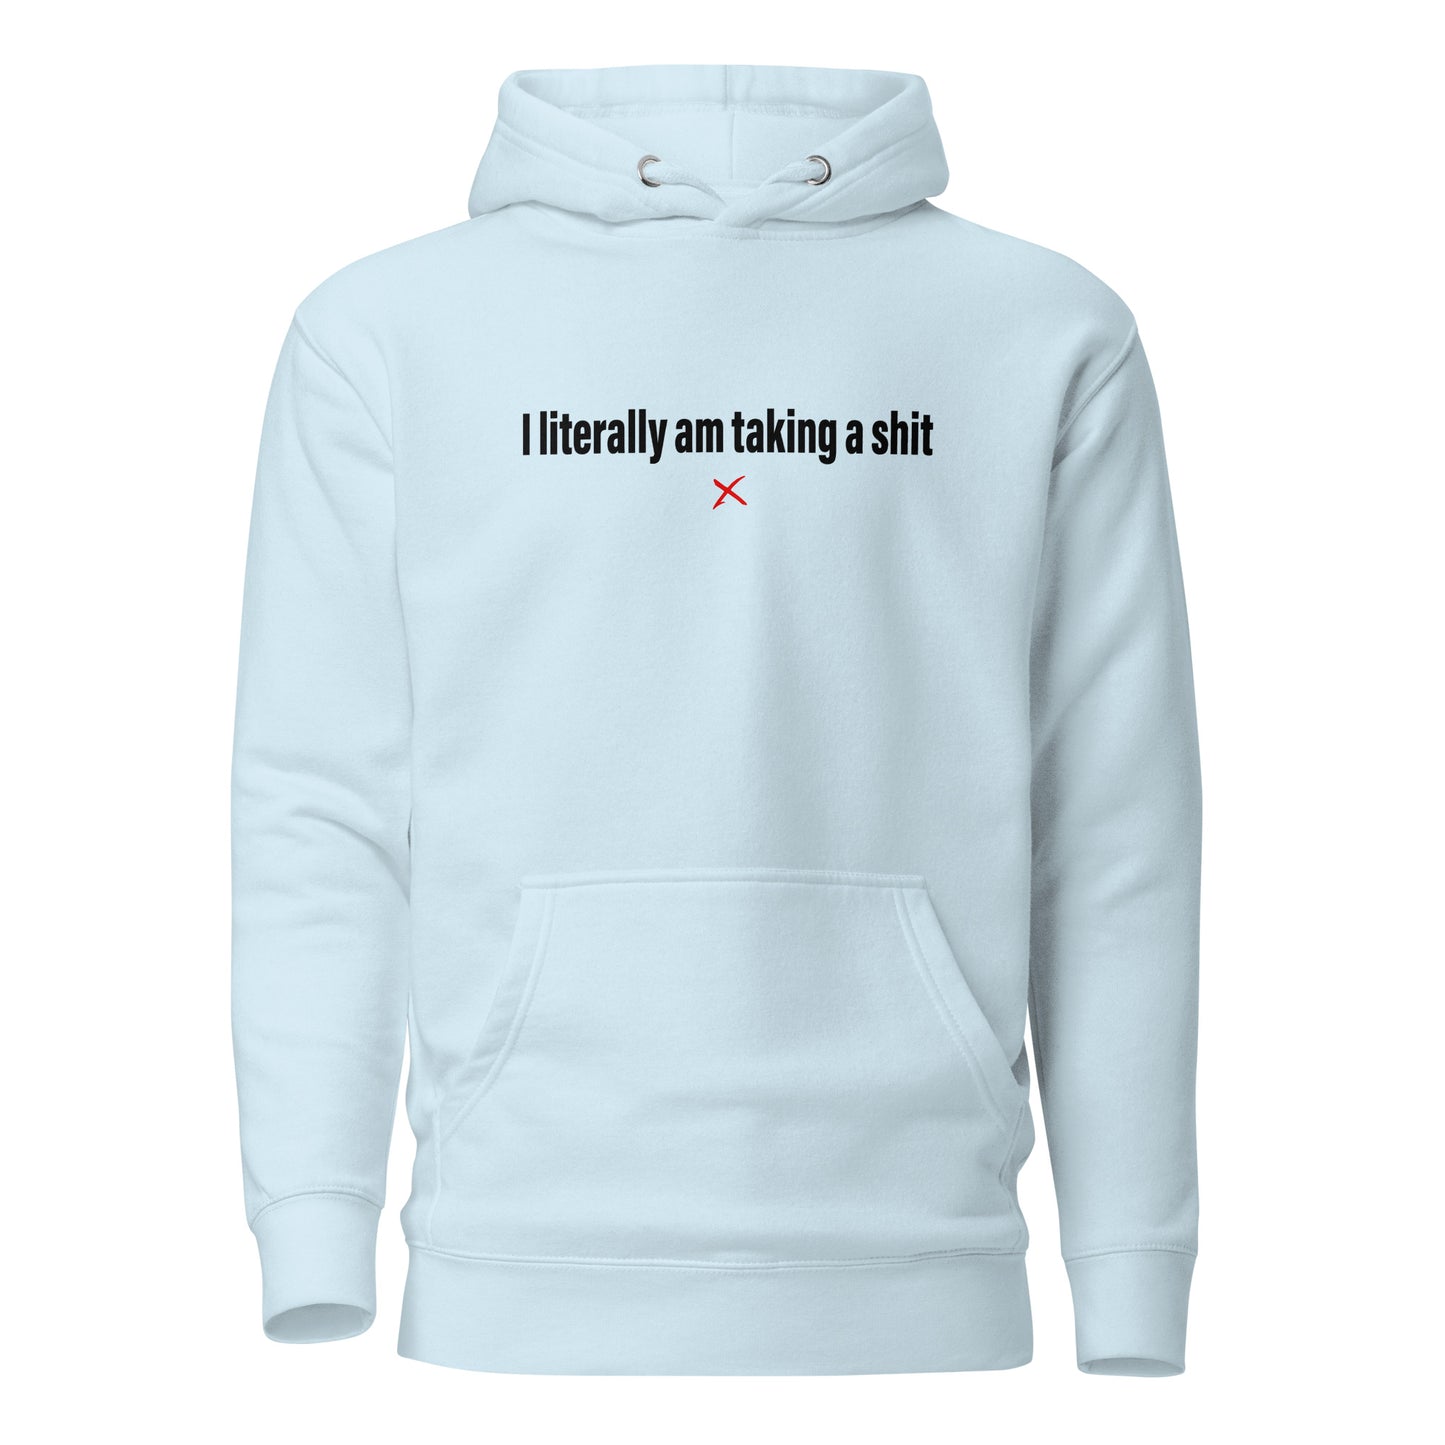 I literally am taking a shit - Hoodie